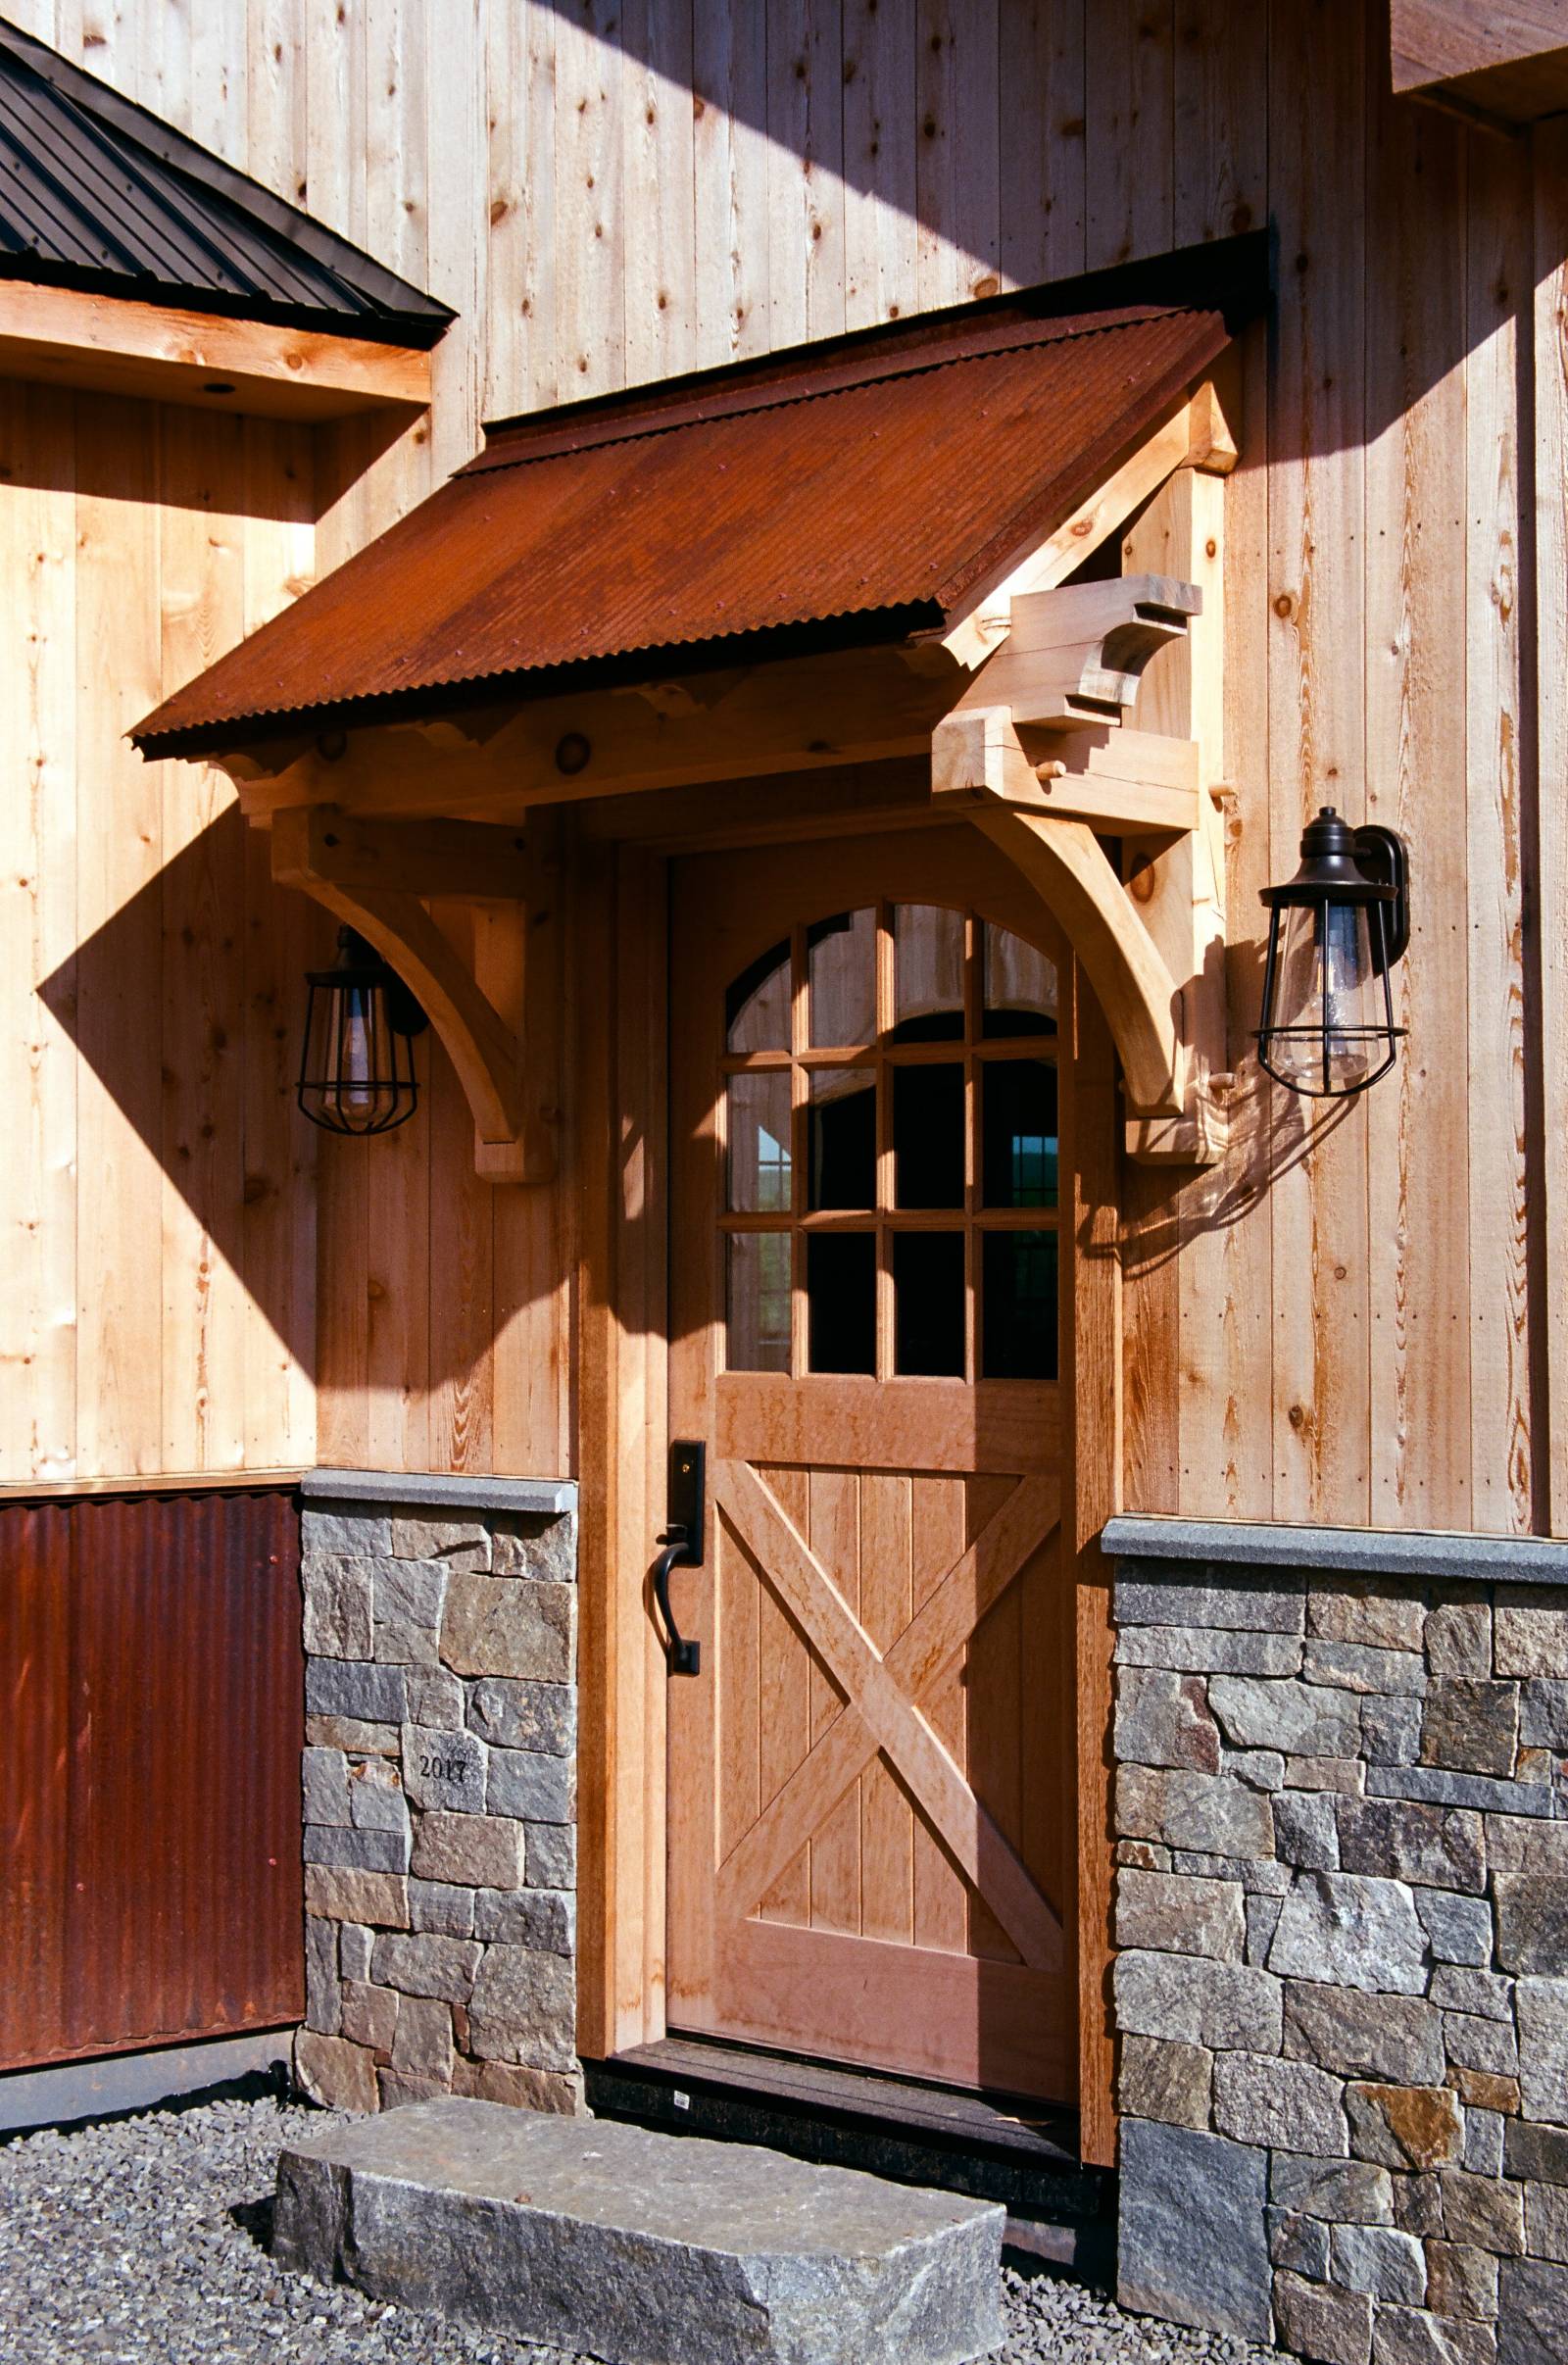 Timber Frame Eyebrow Roof over Entry Door